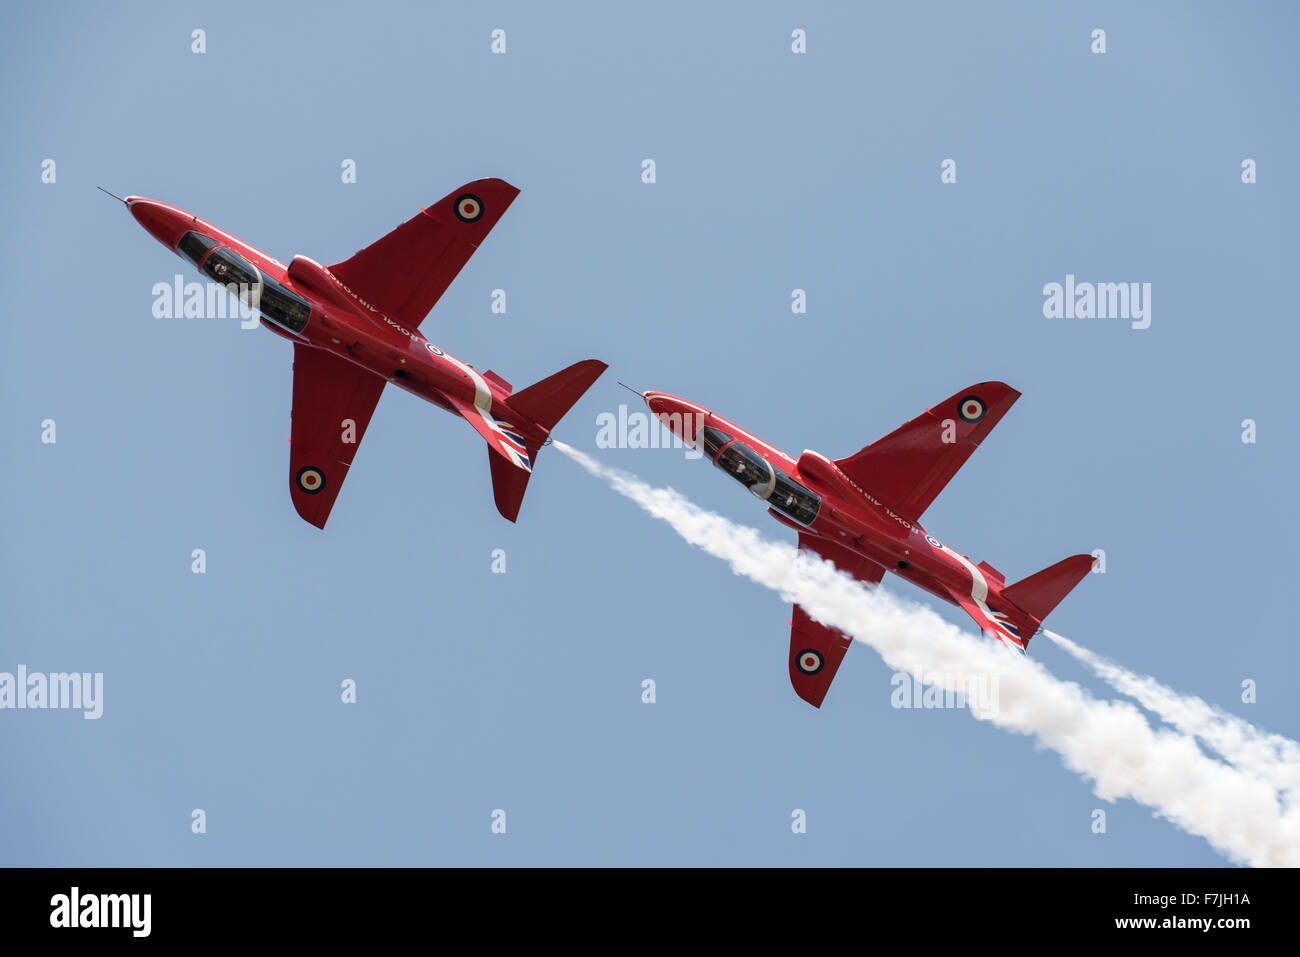 The RAF Red Arrows aerobatic display team's 'Synchro Pair' perform their exciting routine at the 2015 International Air Tattoo a Stock Photo